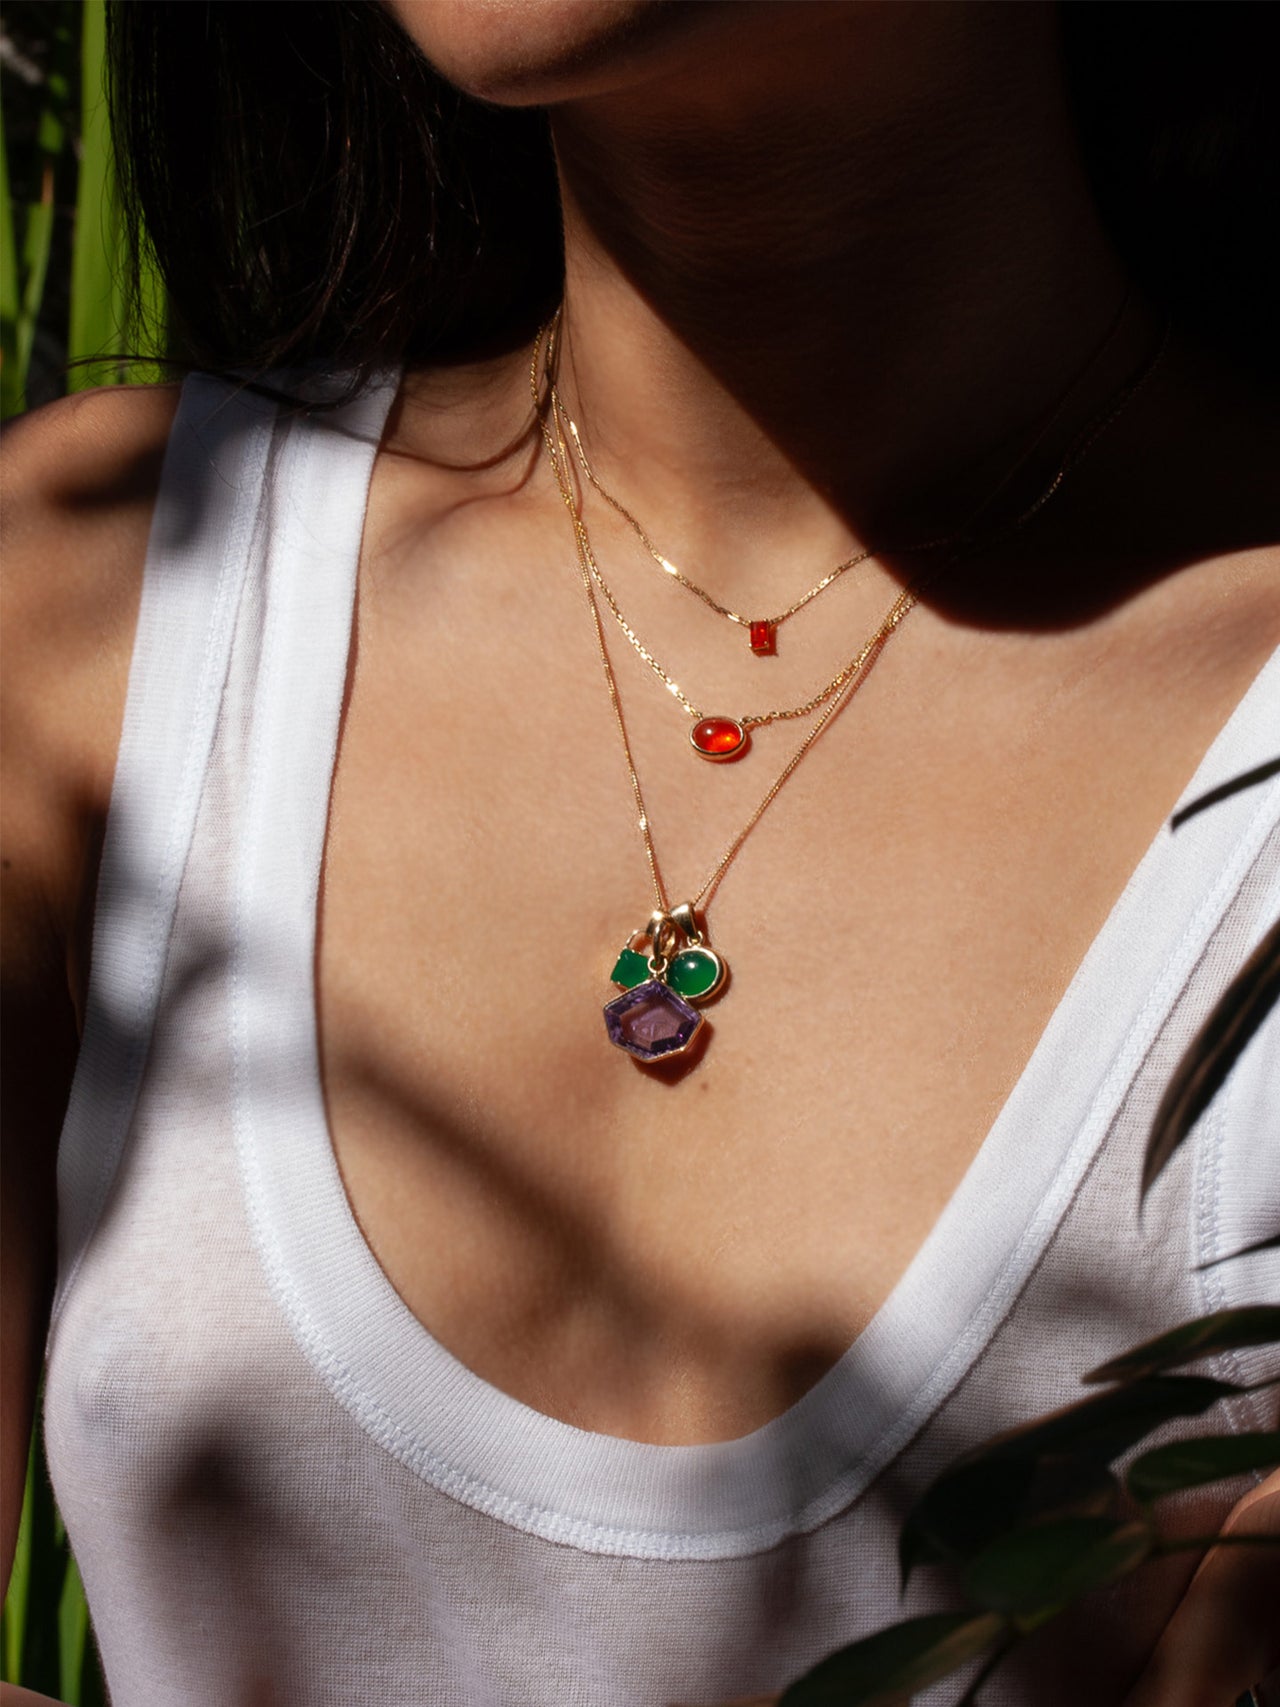 Fire Opal Cabochon Necklace pictured on model. Layered with other gemstone necklaces.